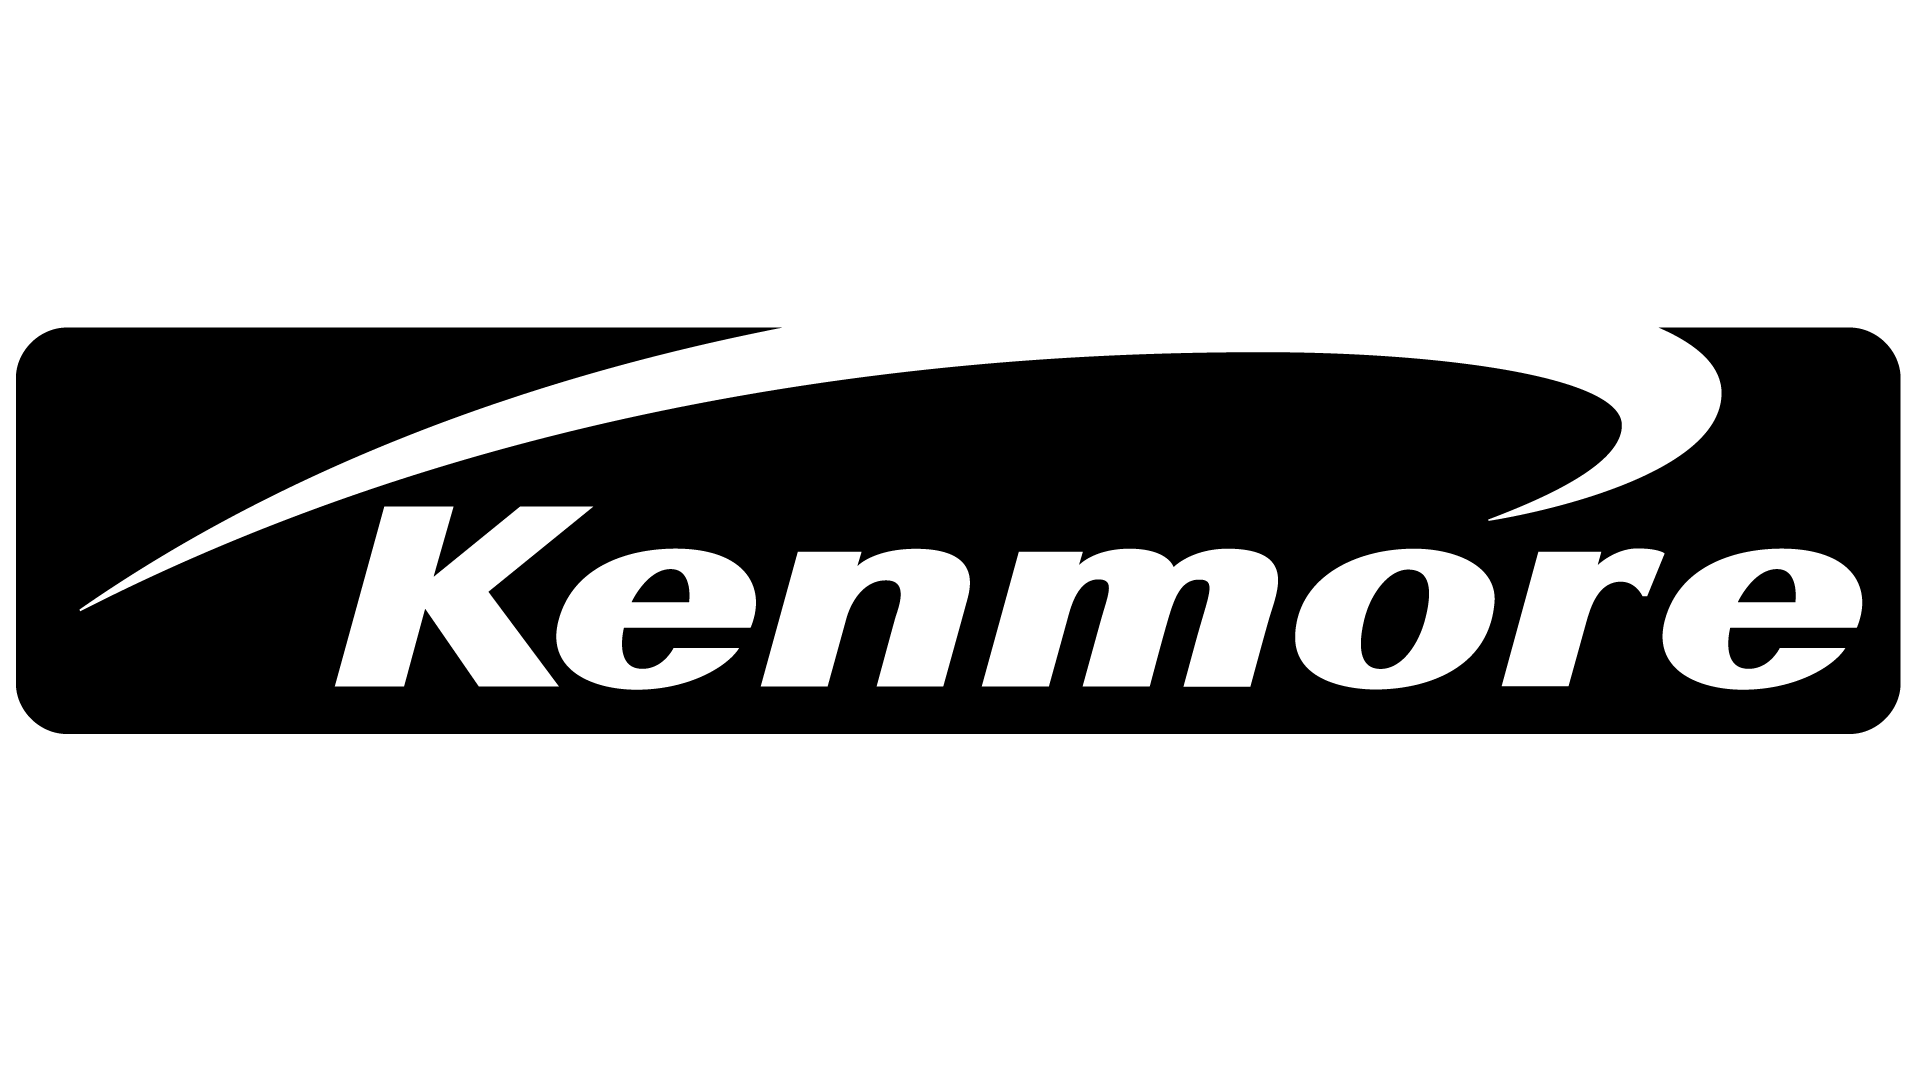 Kenmore Logo - Kenmore Logo, Kenmore Symbol, Meaning, History and Evolution